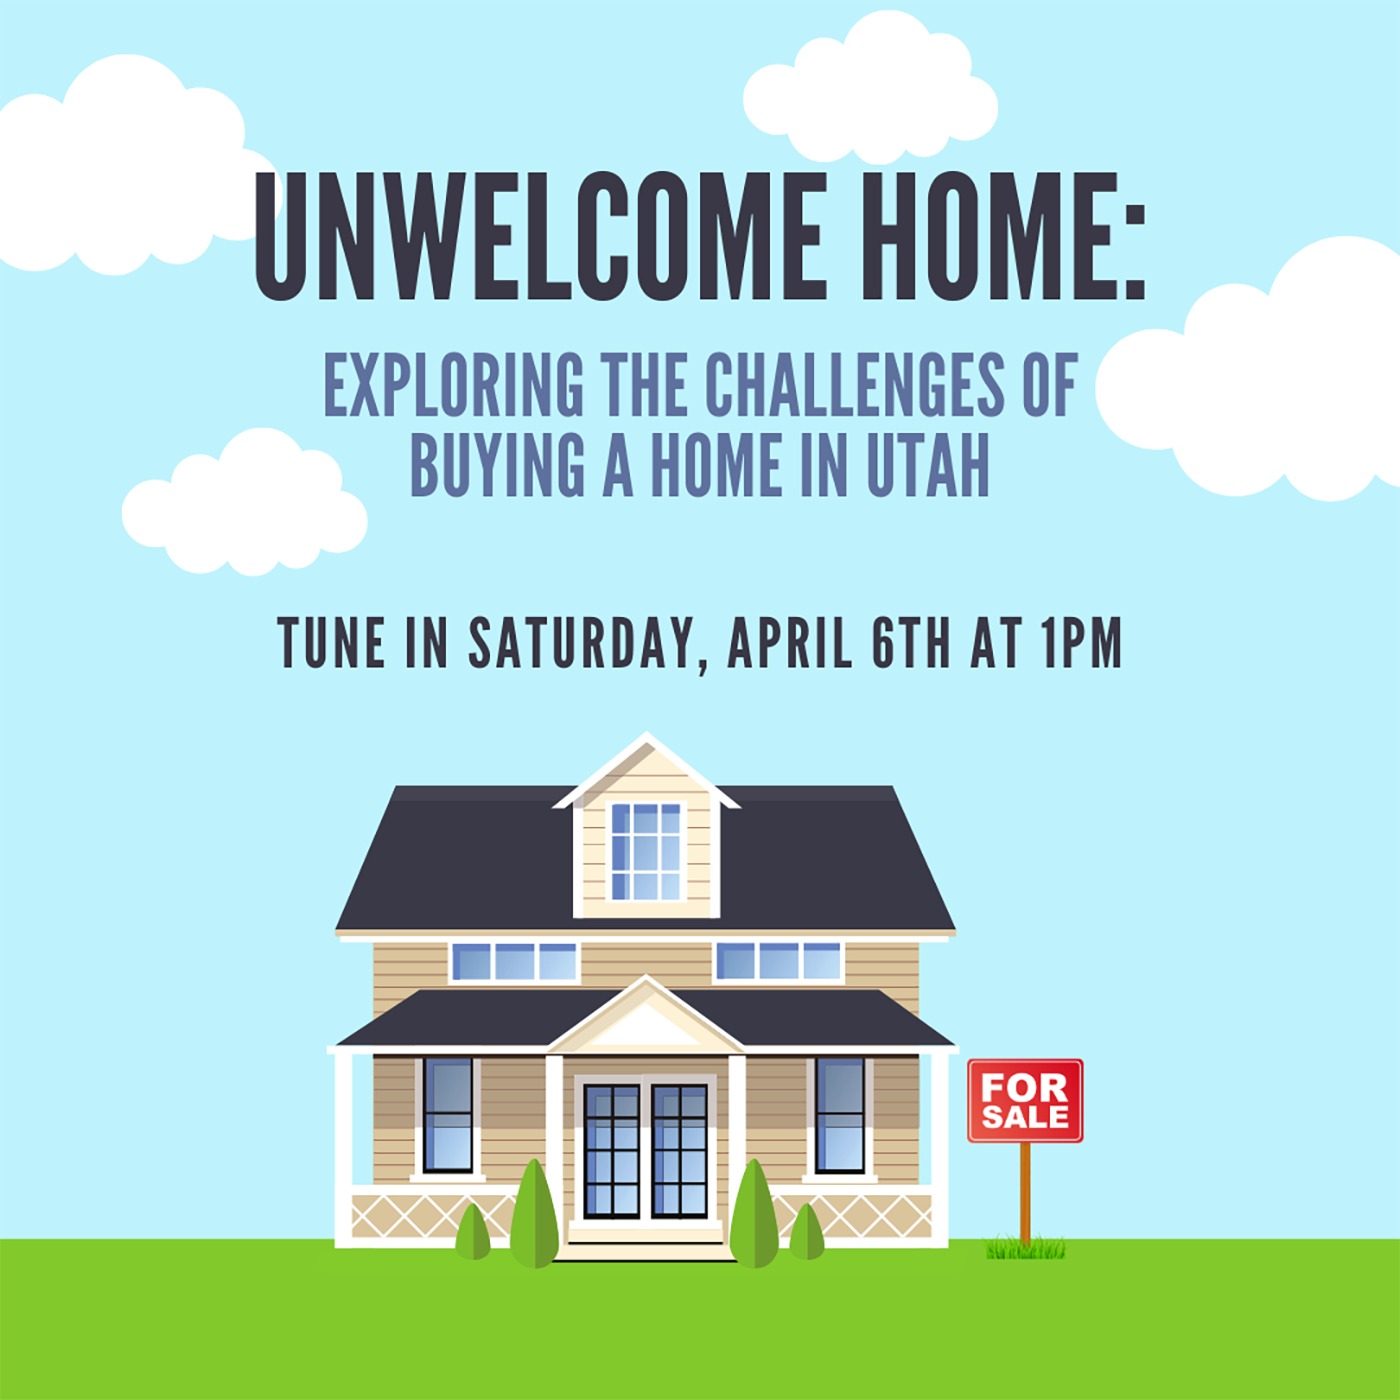 Unwelcome Home: Exploring the Challenges of Buying a Home in Utah